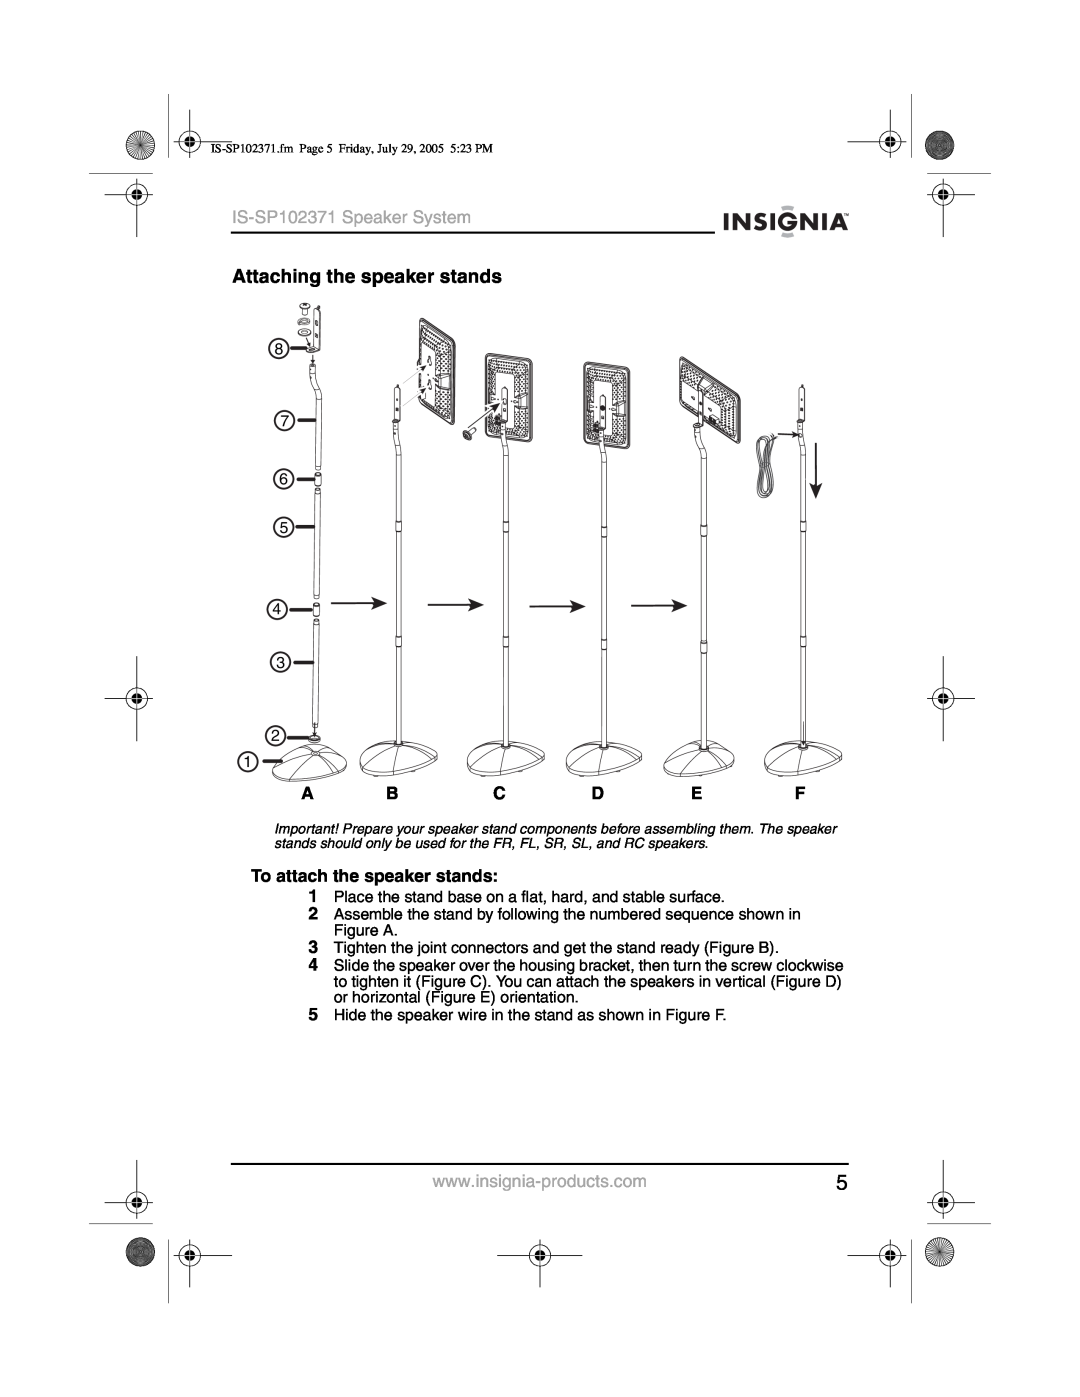 Insignia manual Attaching the speaker stands, A B C D E F, To attach the speaker stands, IS-SP102371Speaker System 